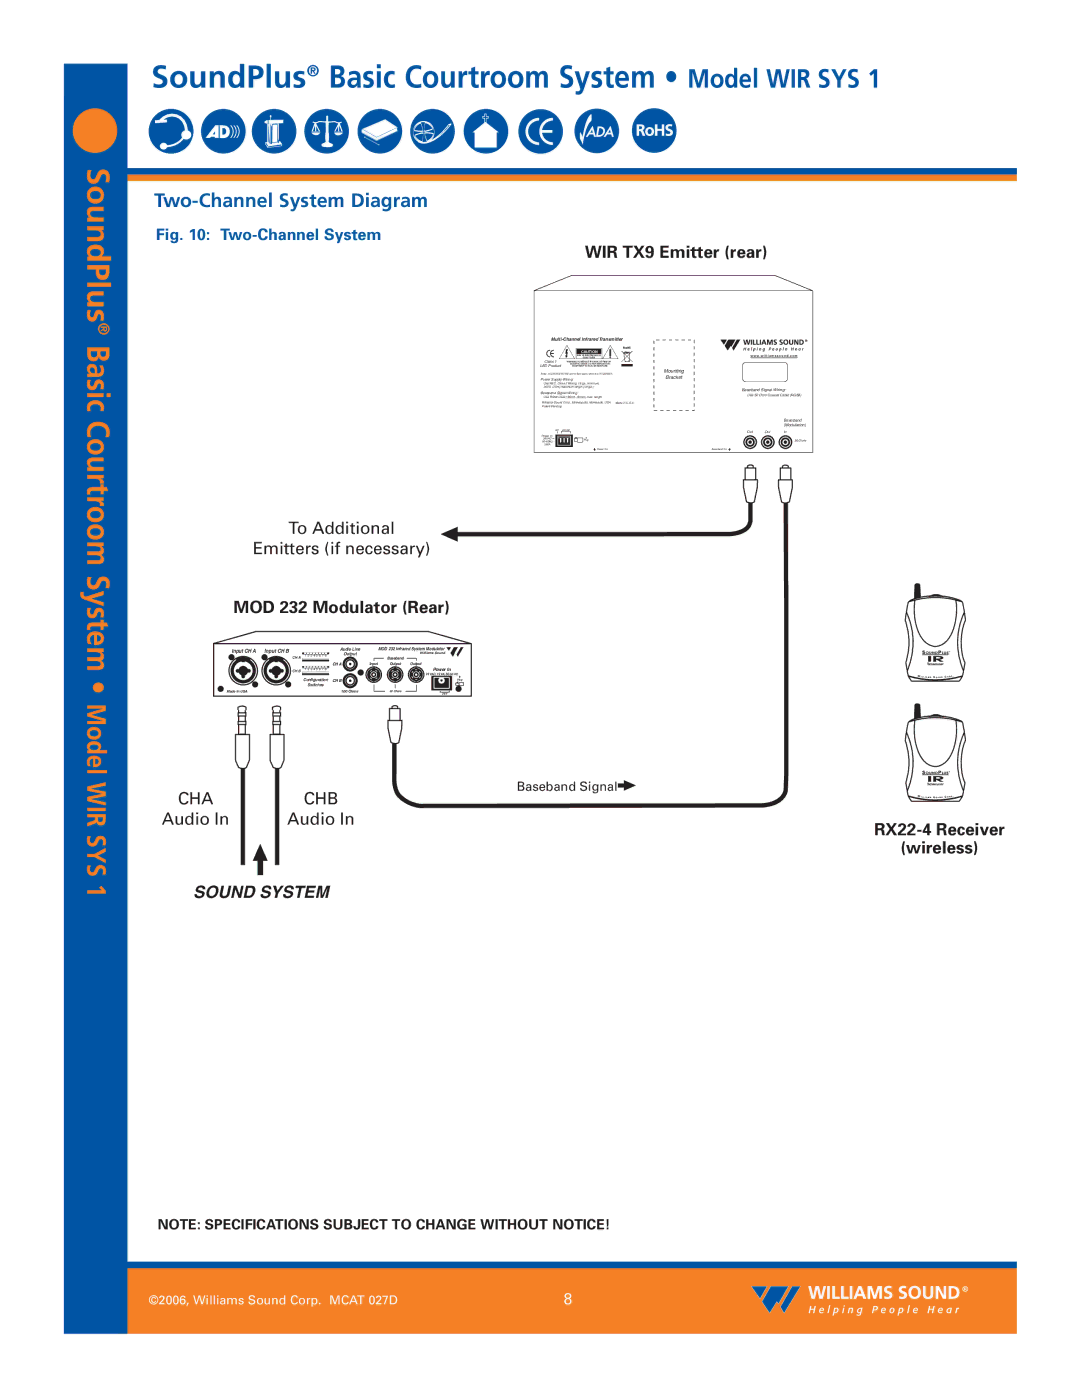 Williams Sound WIR SYS 1 specifications Two-Channel System Diagram 